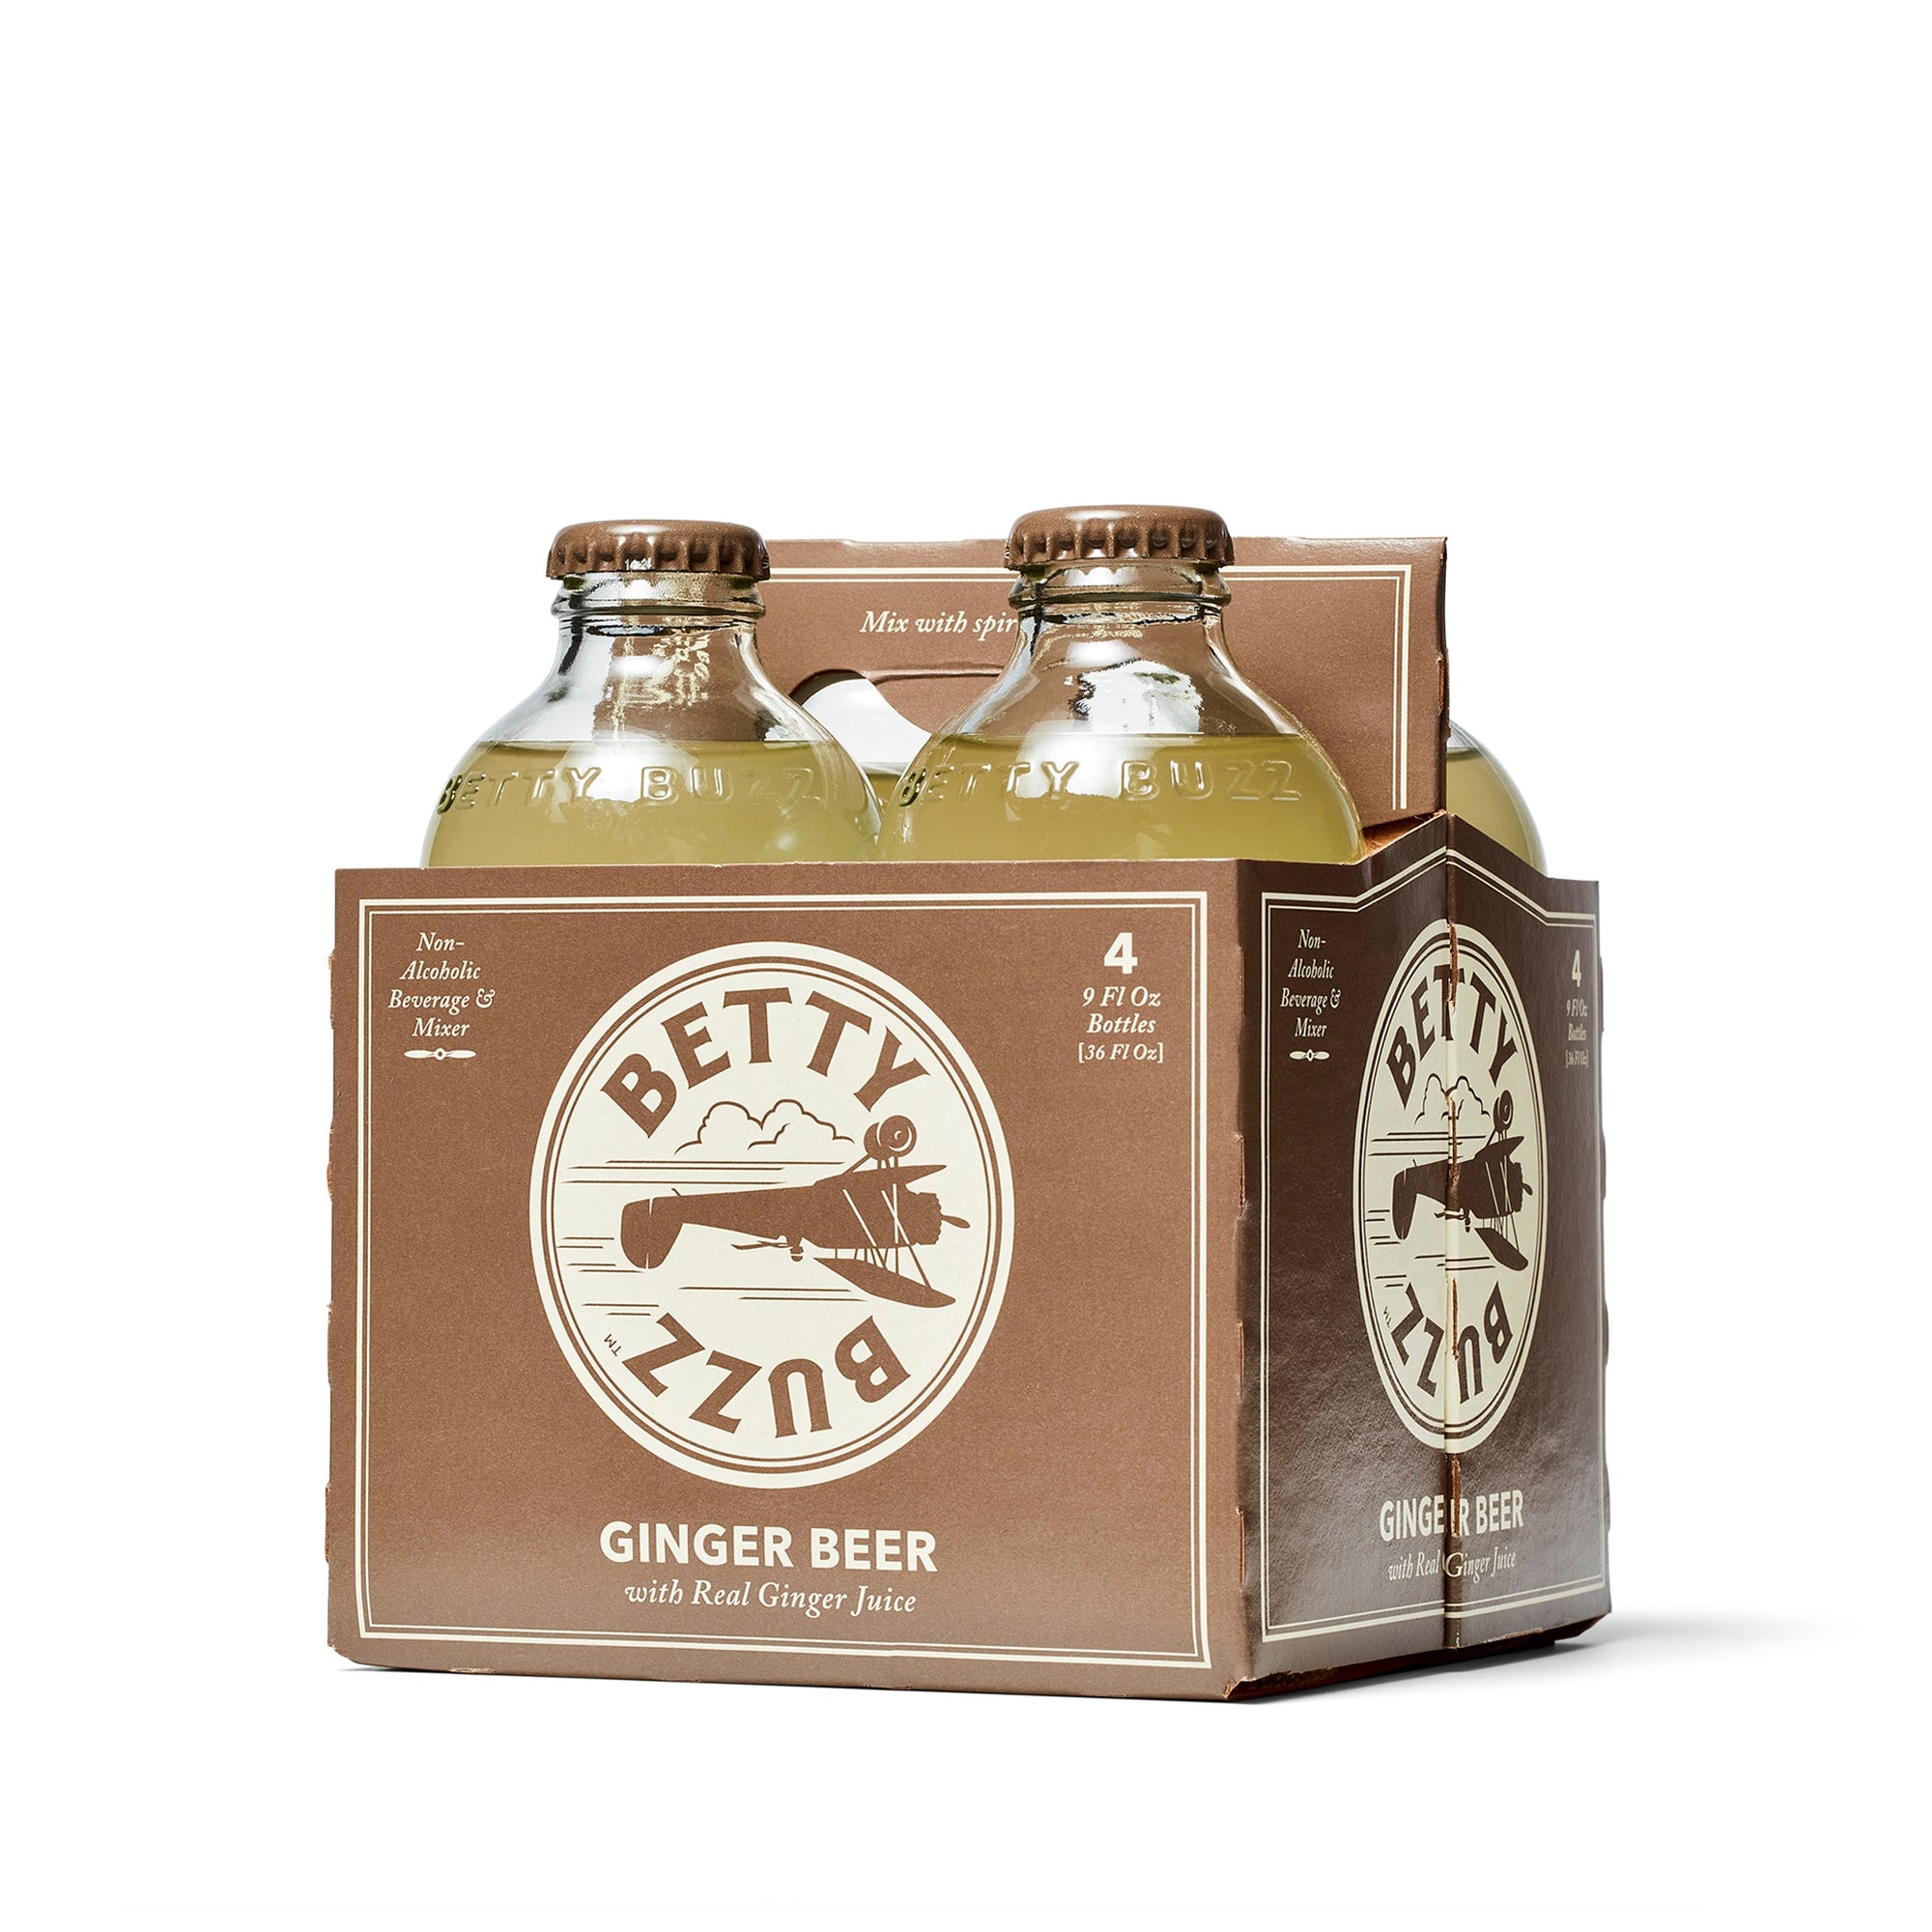 Betty Buzz Non-Alcoholic Ginger Beer (4 pack) - Boisson